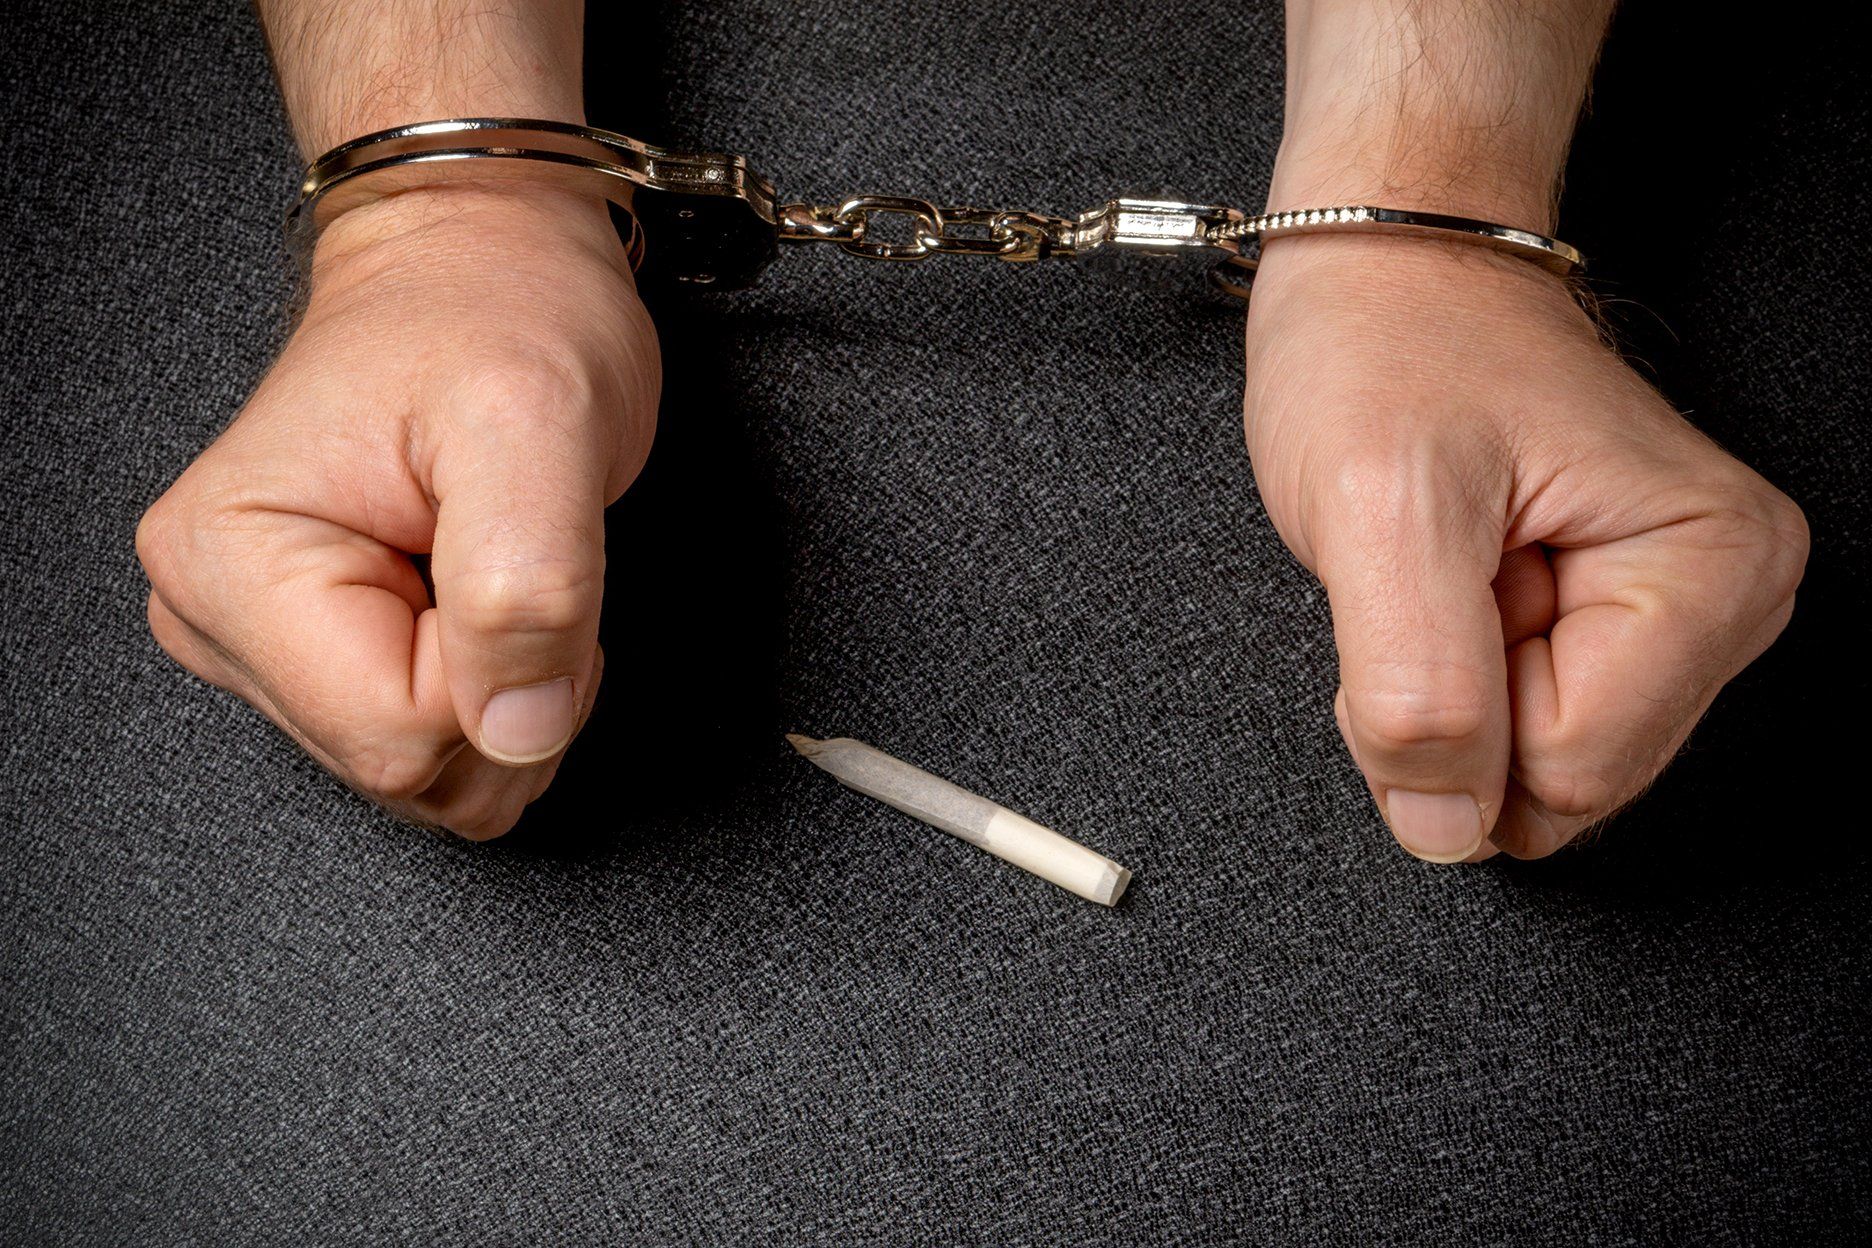 Marijuana Possession in AL Can Result in Serious Consequences